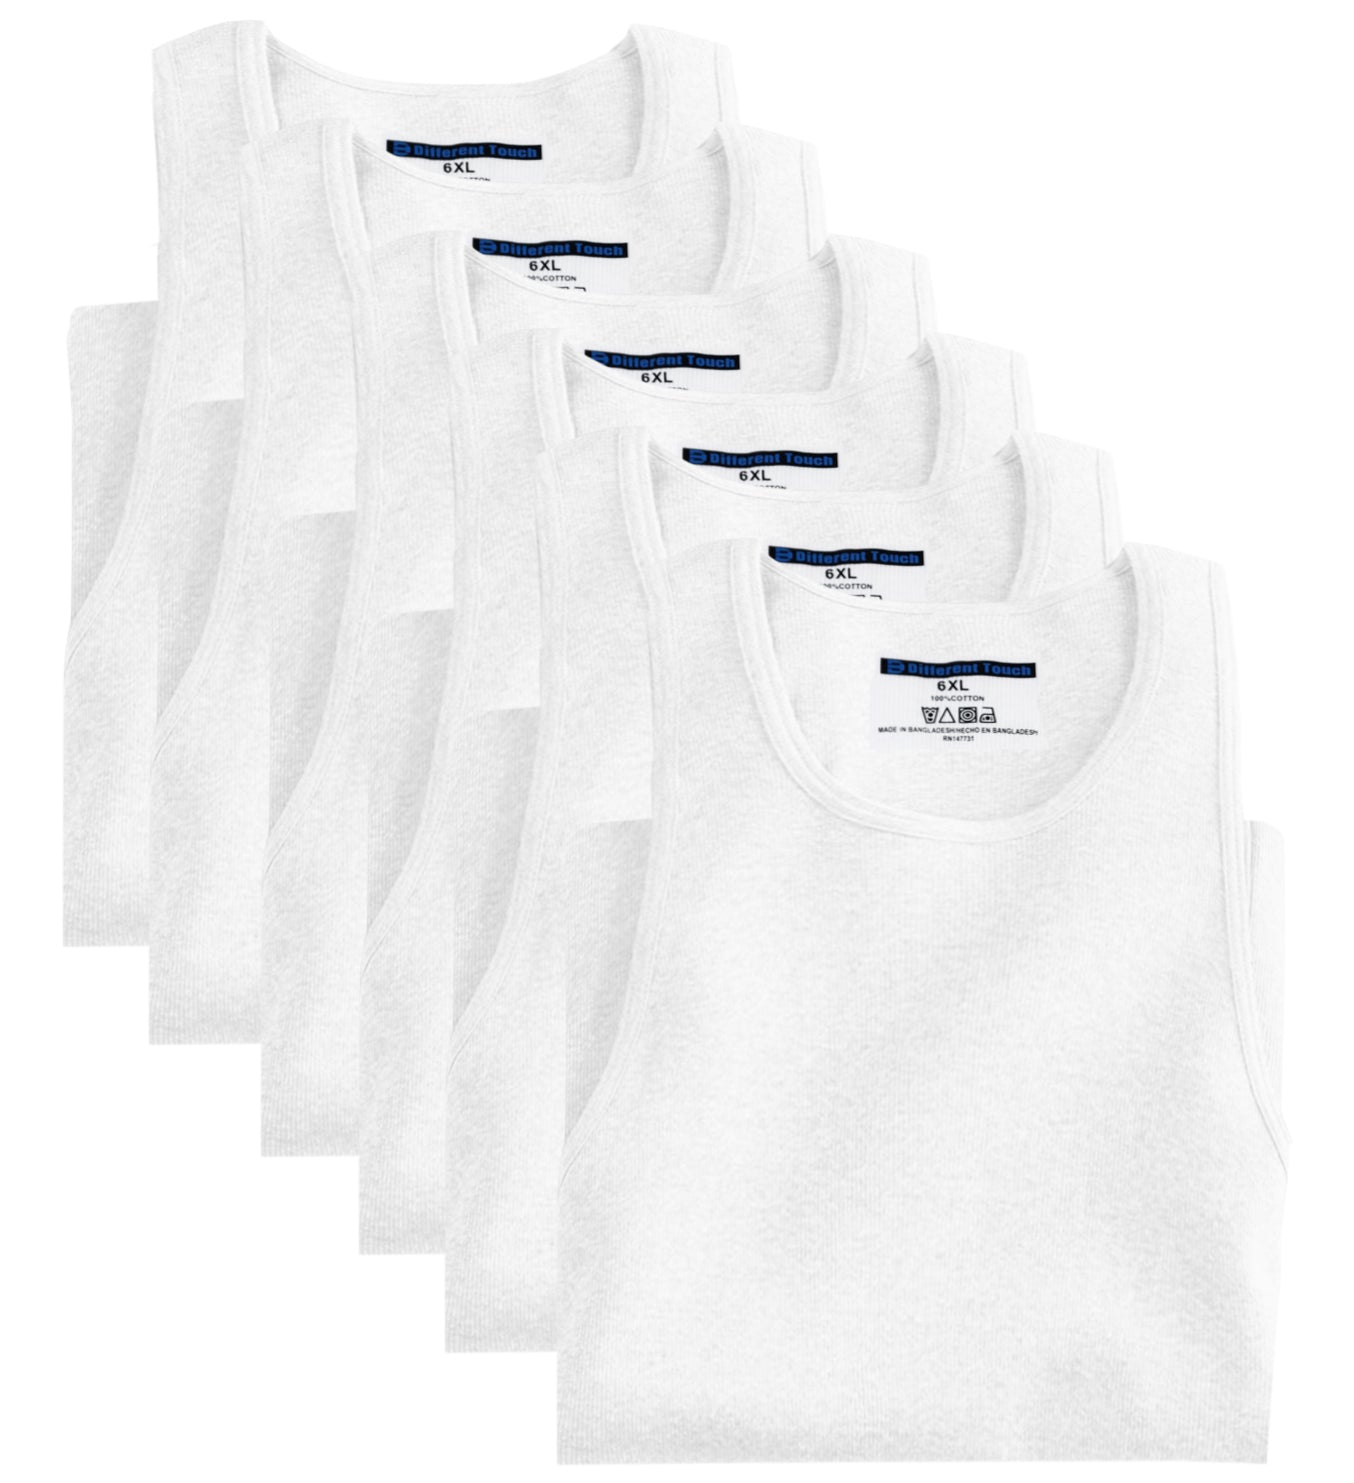 Muscle Ribbed Undershirts Tank Tops | BIG and TALL | Men's (6 Pack)